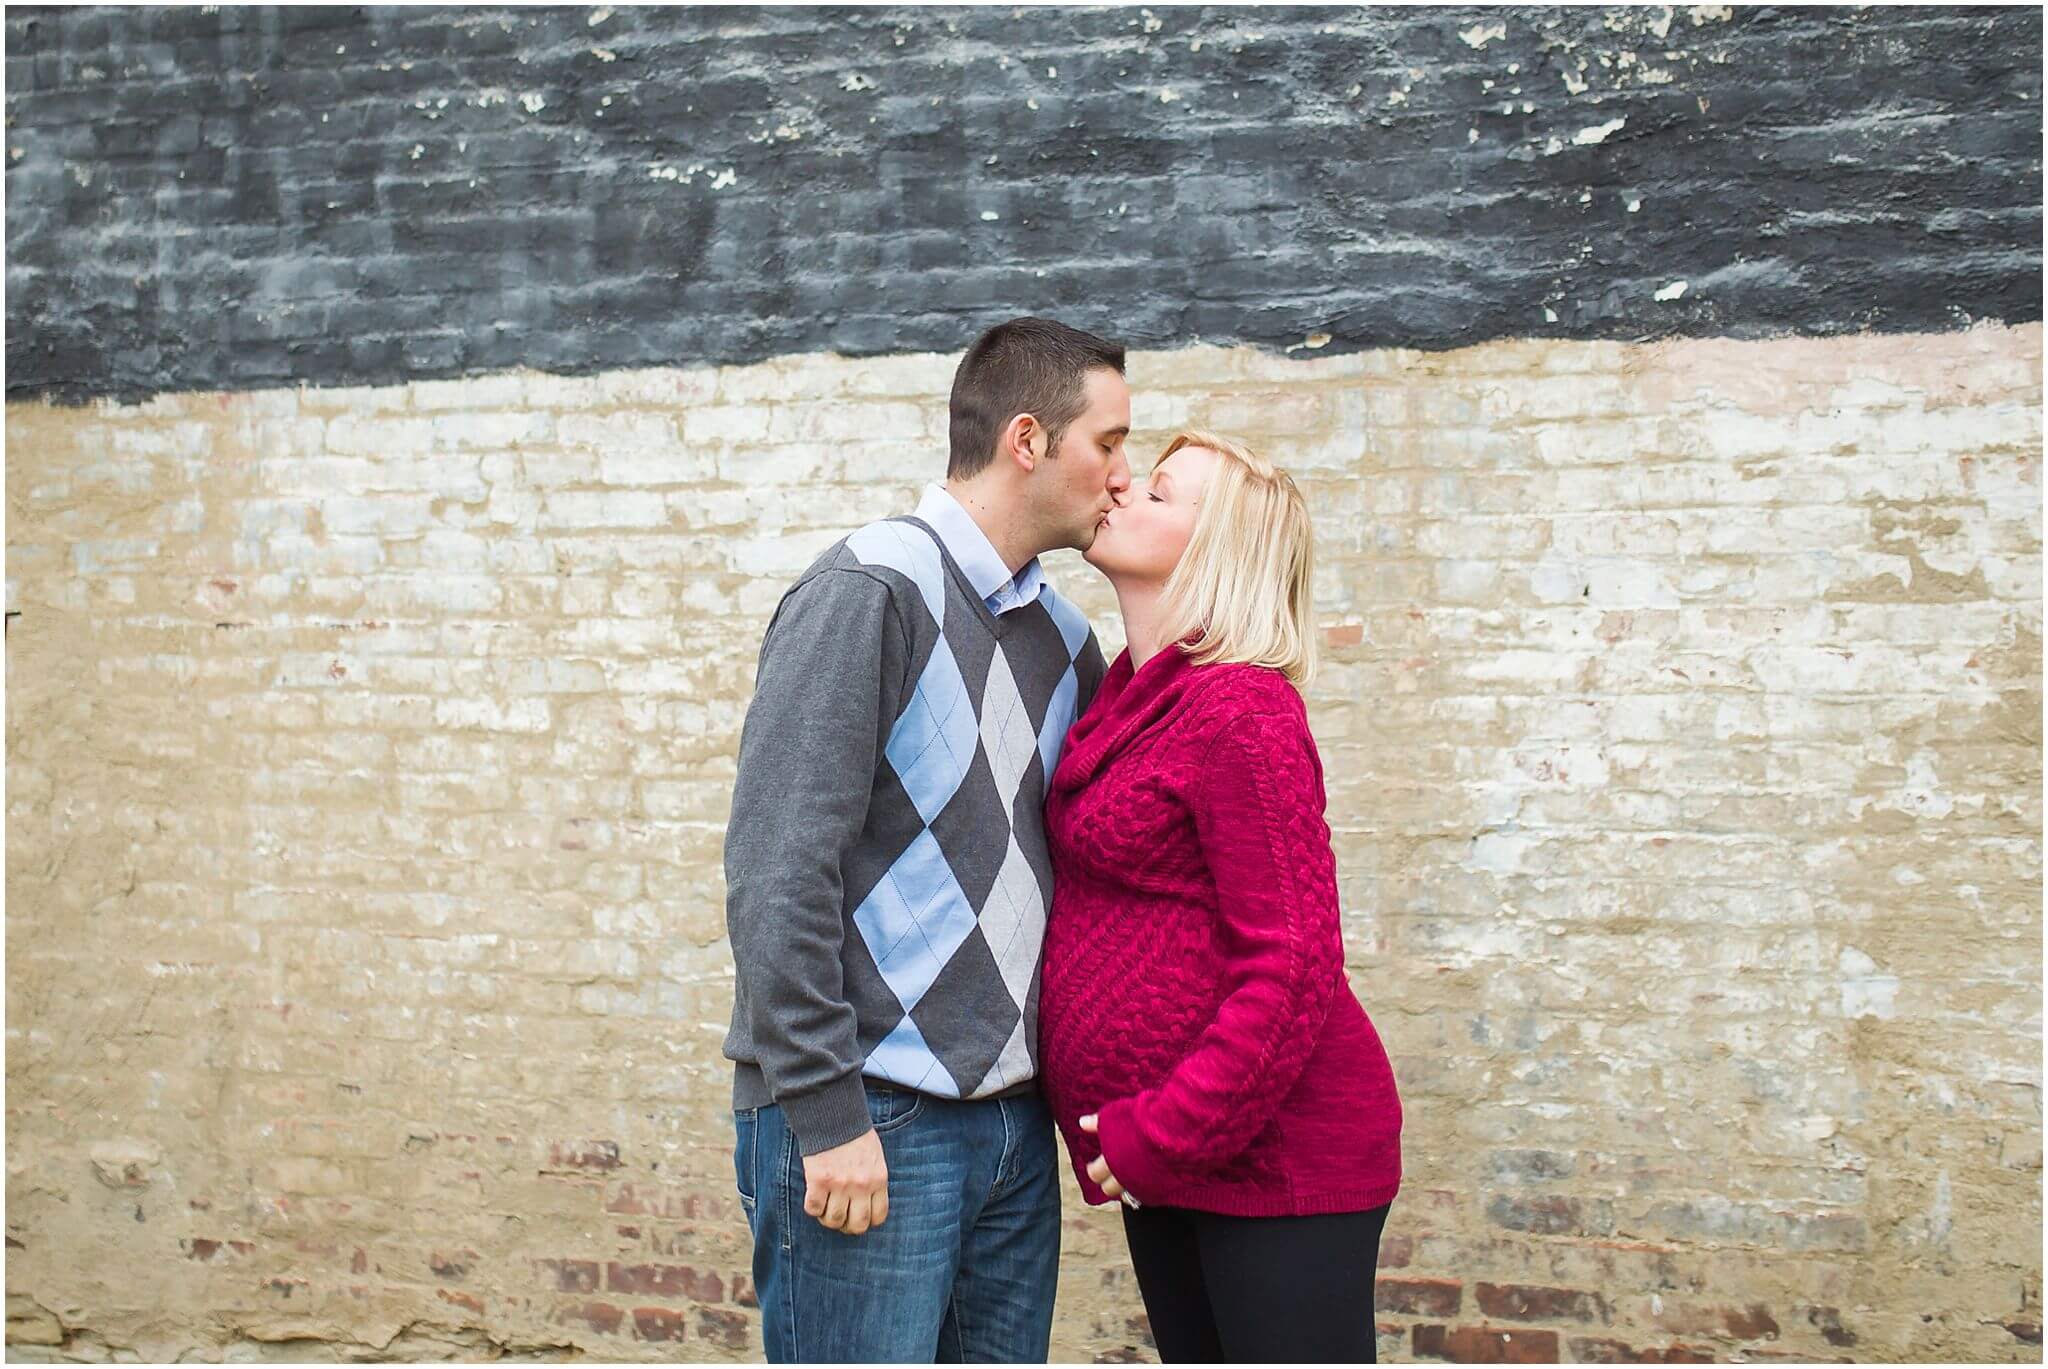 You are currently viewing Maternity Session with Jaclyn & Thomas | Twins